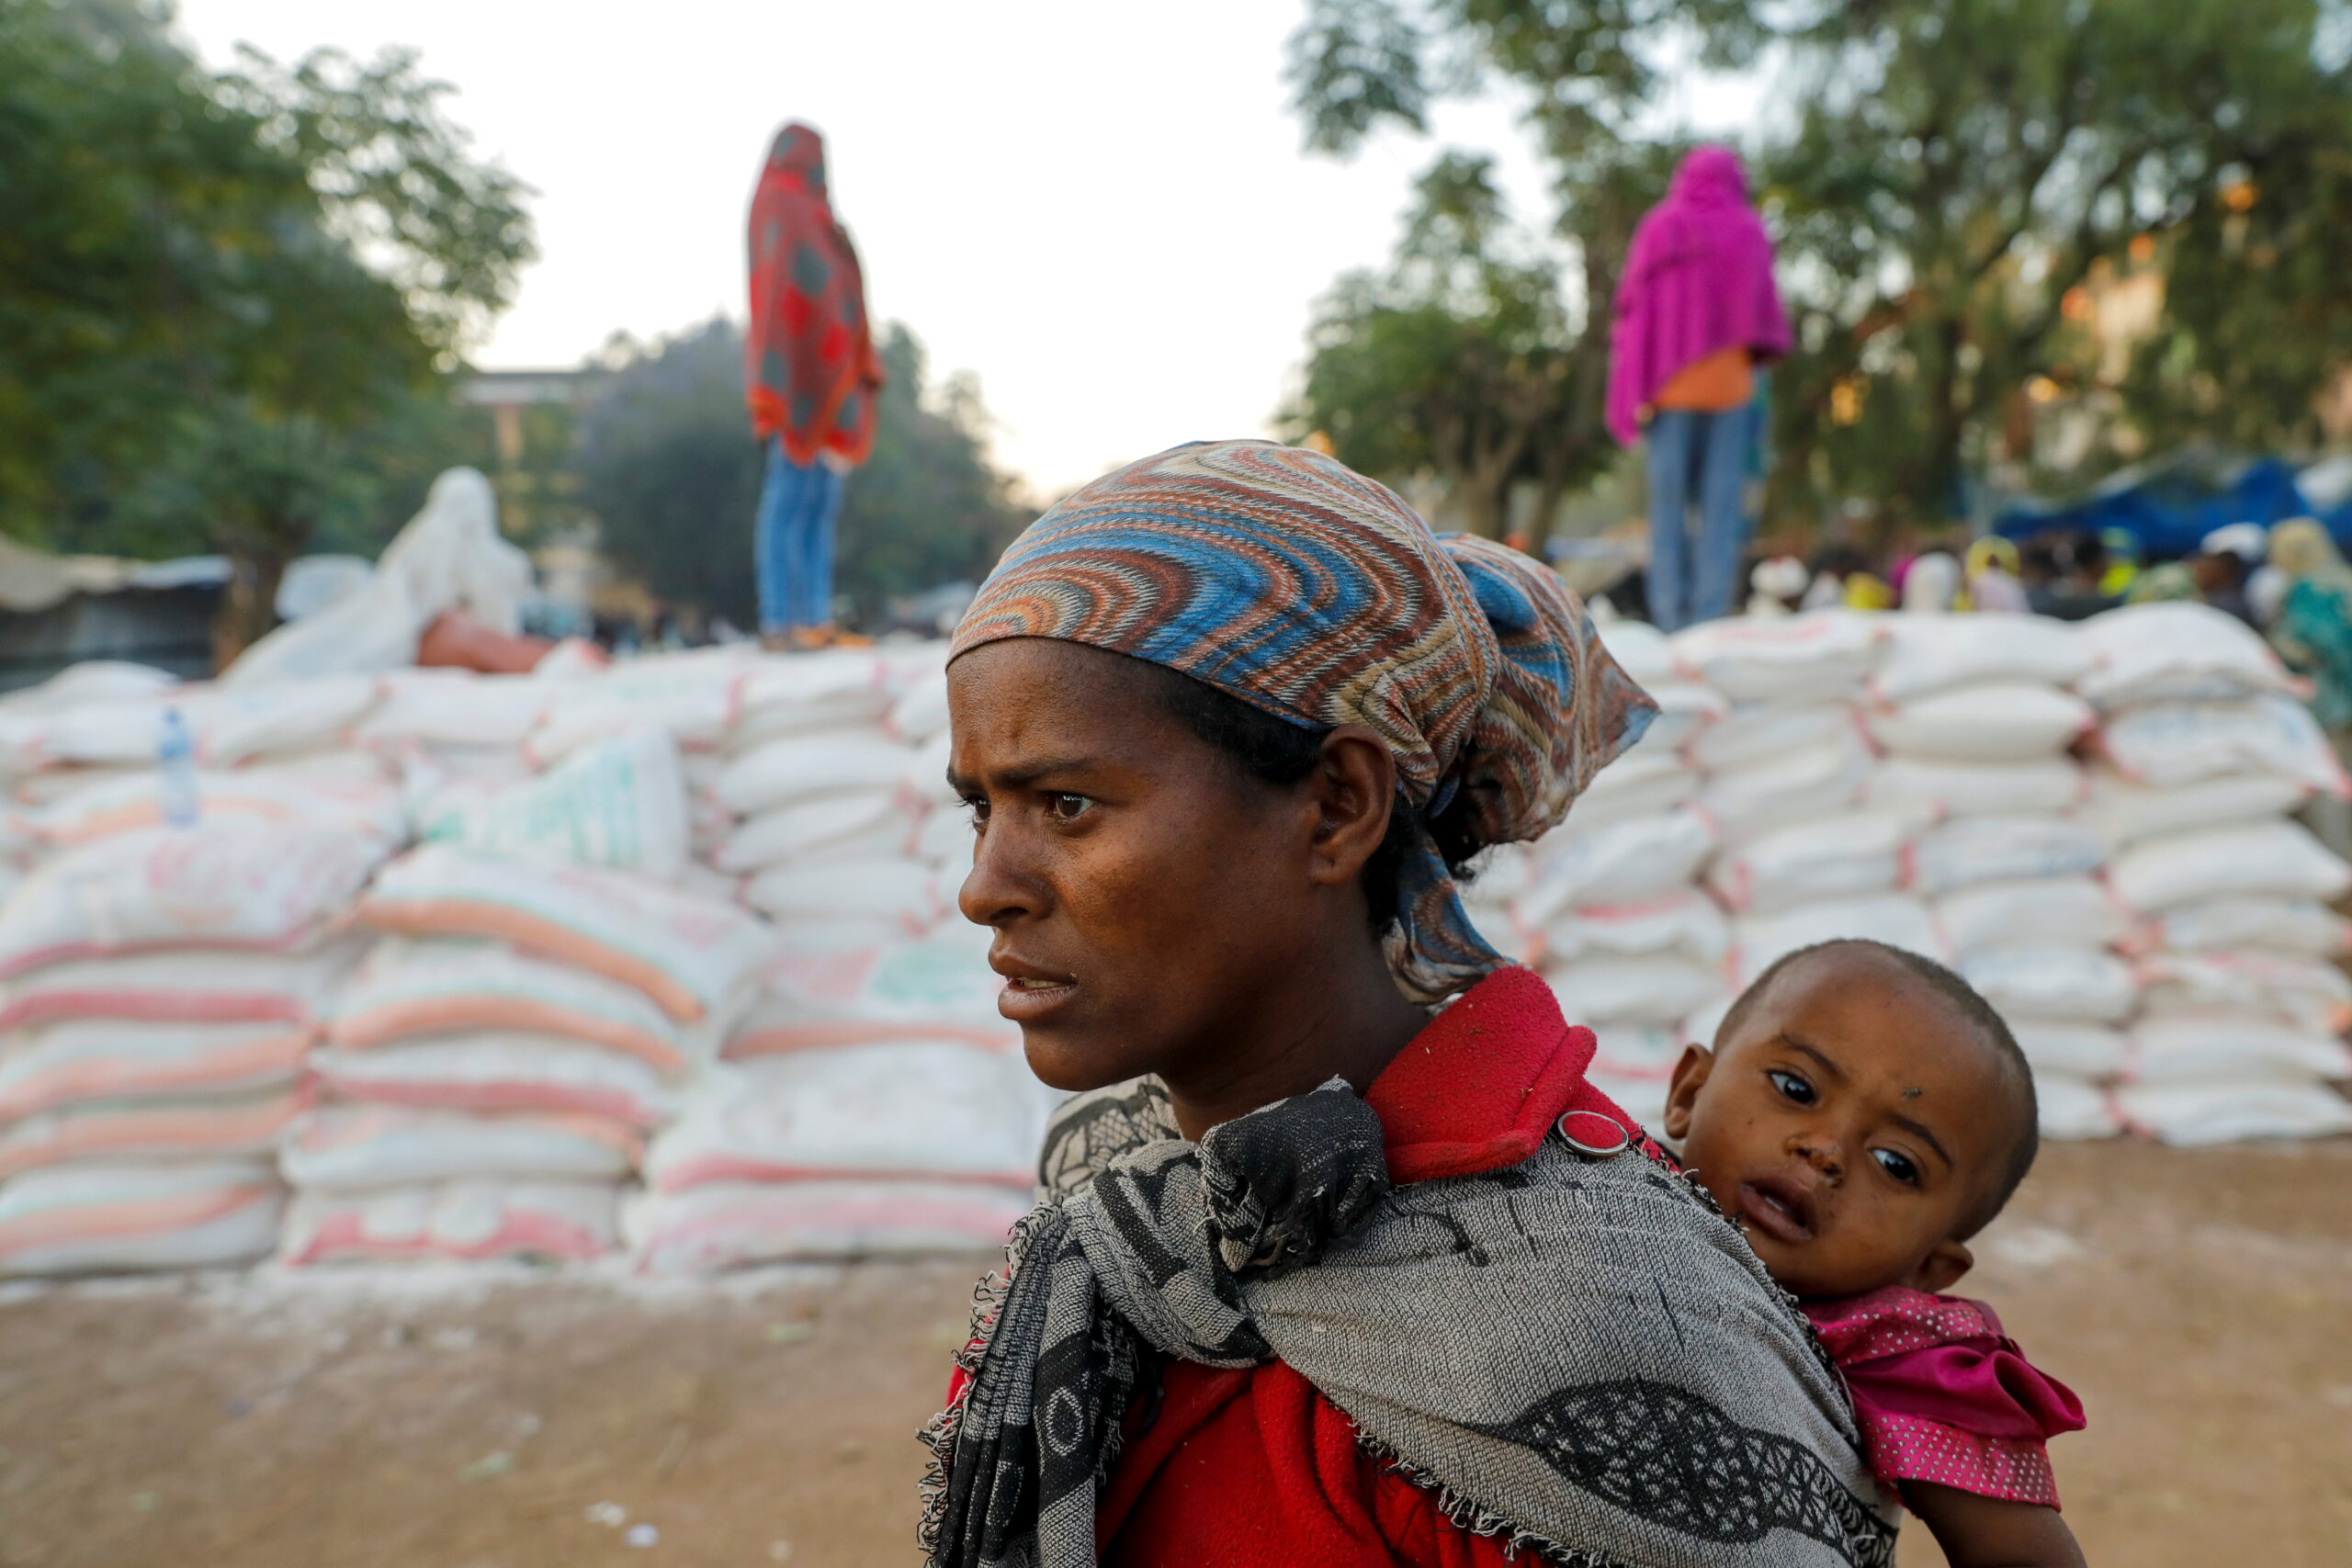 Woman carries an infant as she queues in line for food, at the Tsehaye primary school, in Shire